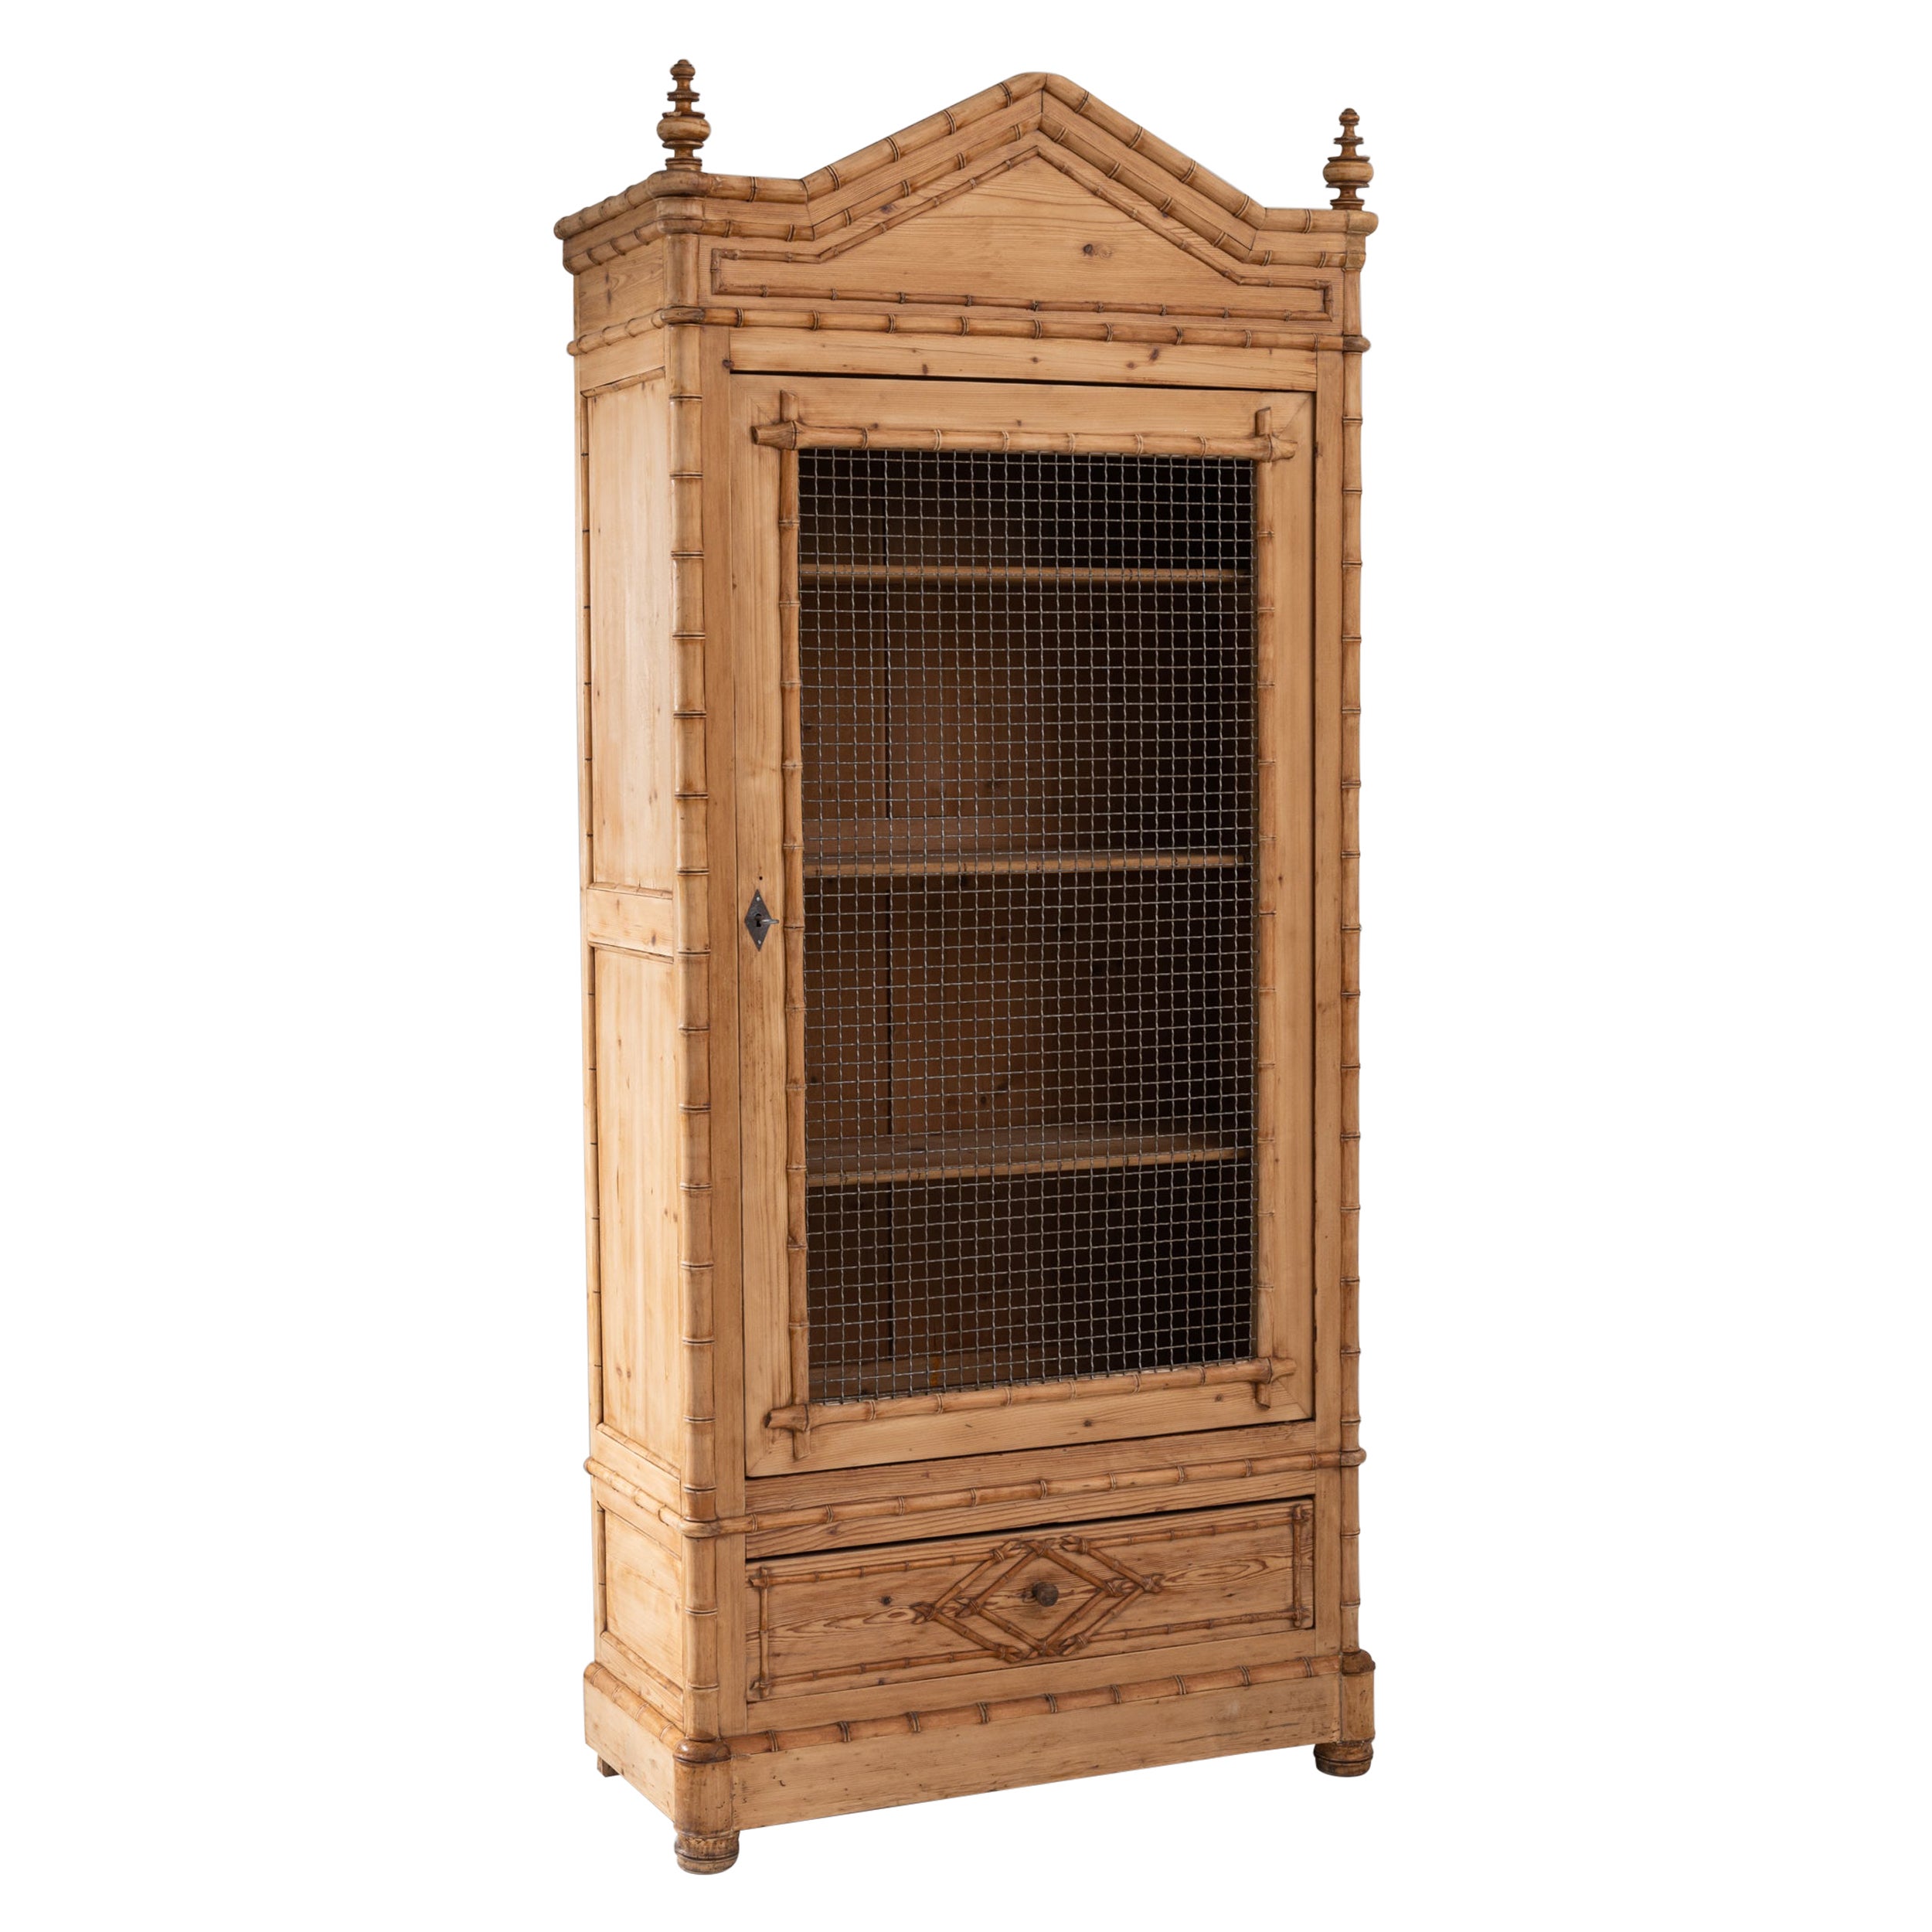 Vintage French Faux Bamboo Cabinet